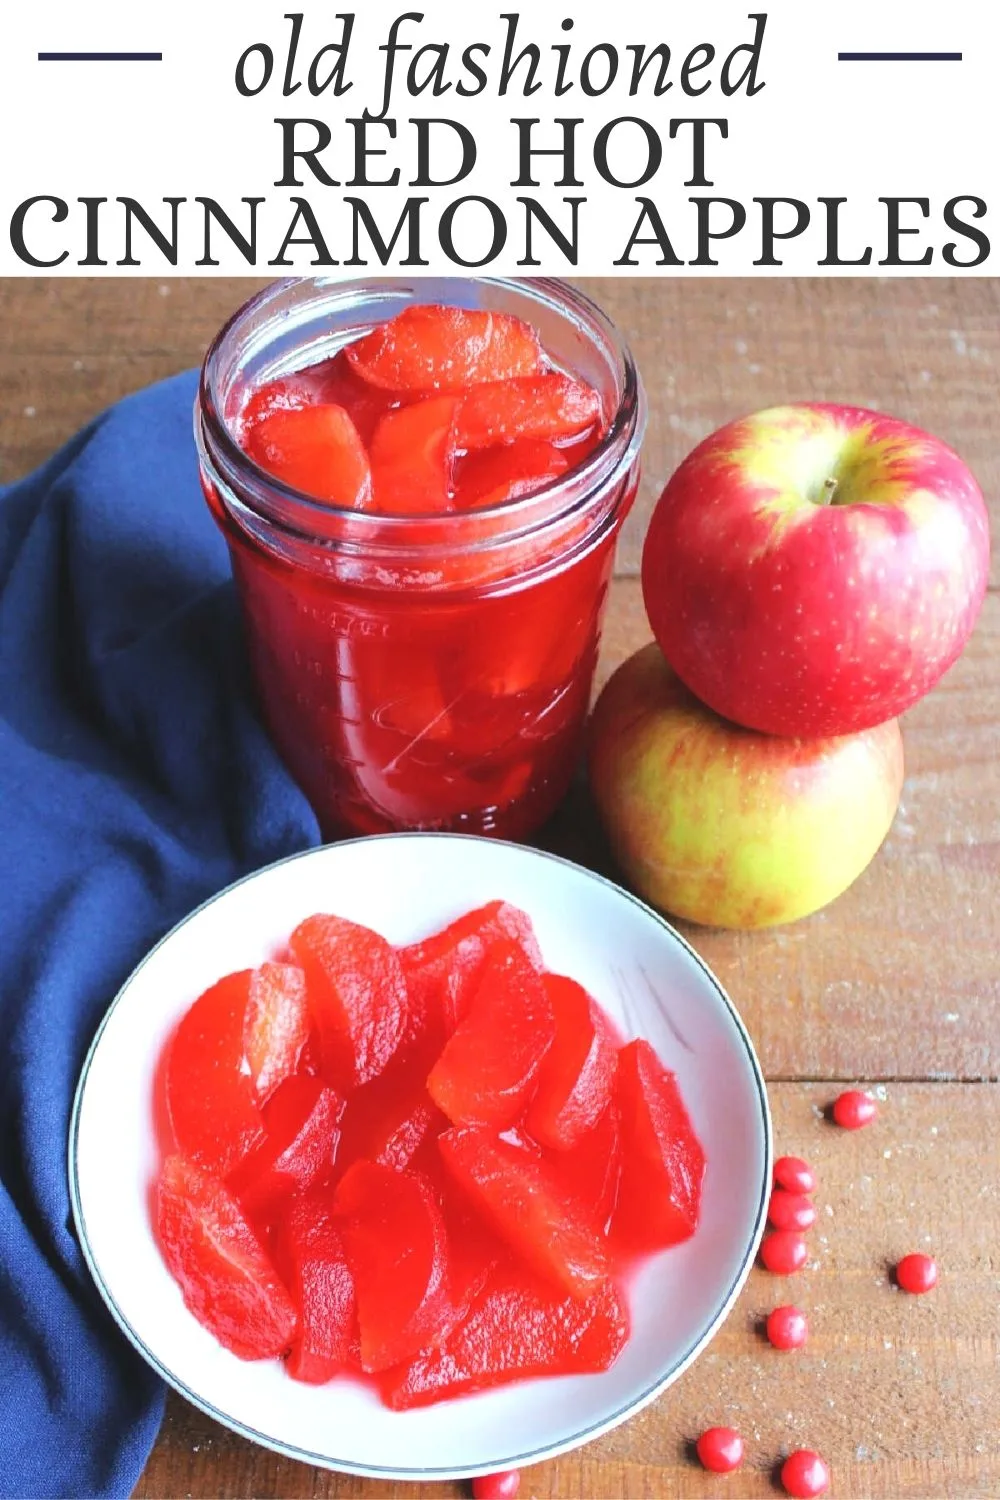 Old fashioned red hot cinnamon apples are a classic side dish or simple dessert. My great-grandma served them with pork chops but they are also wonderful with a scoop of ice cream or dollop of whipped cream.